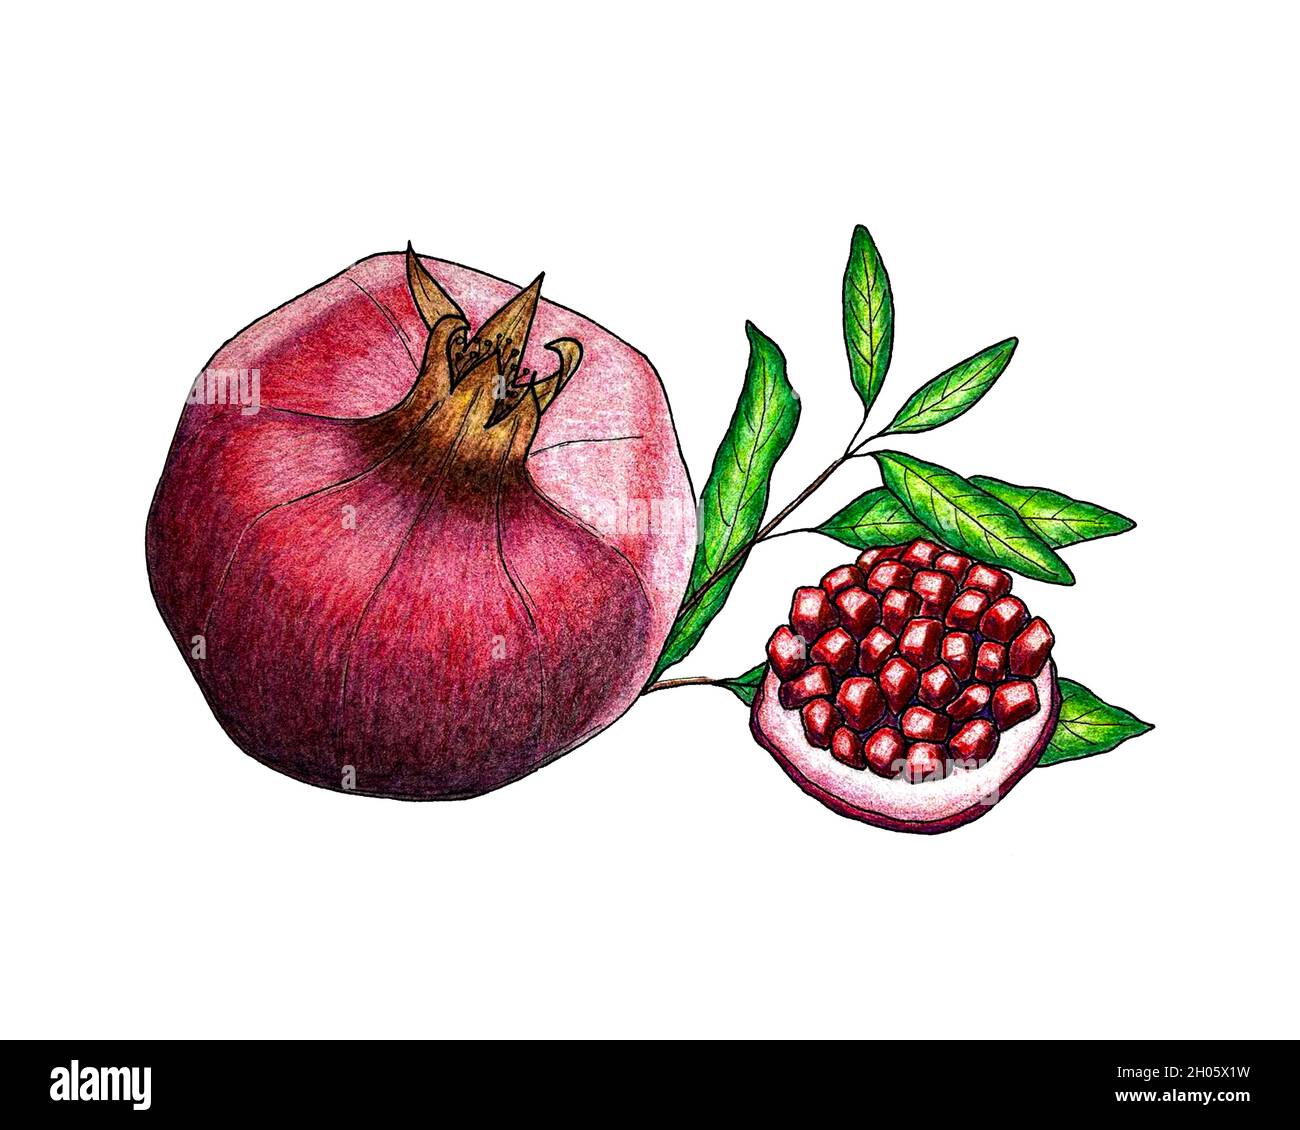 Illustration Pomegranate fruit pencil drawing, a slice with grains, a branch with leaves. On white background. For your design. Stock Photo